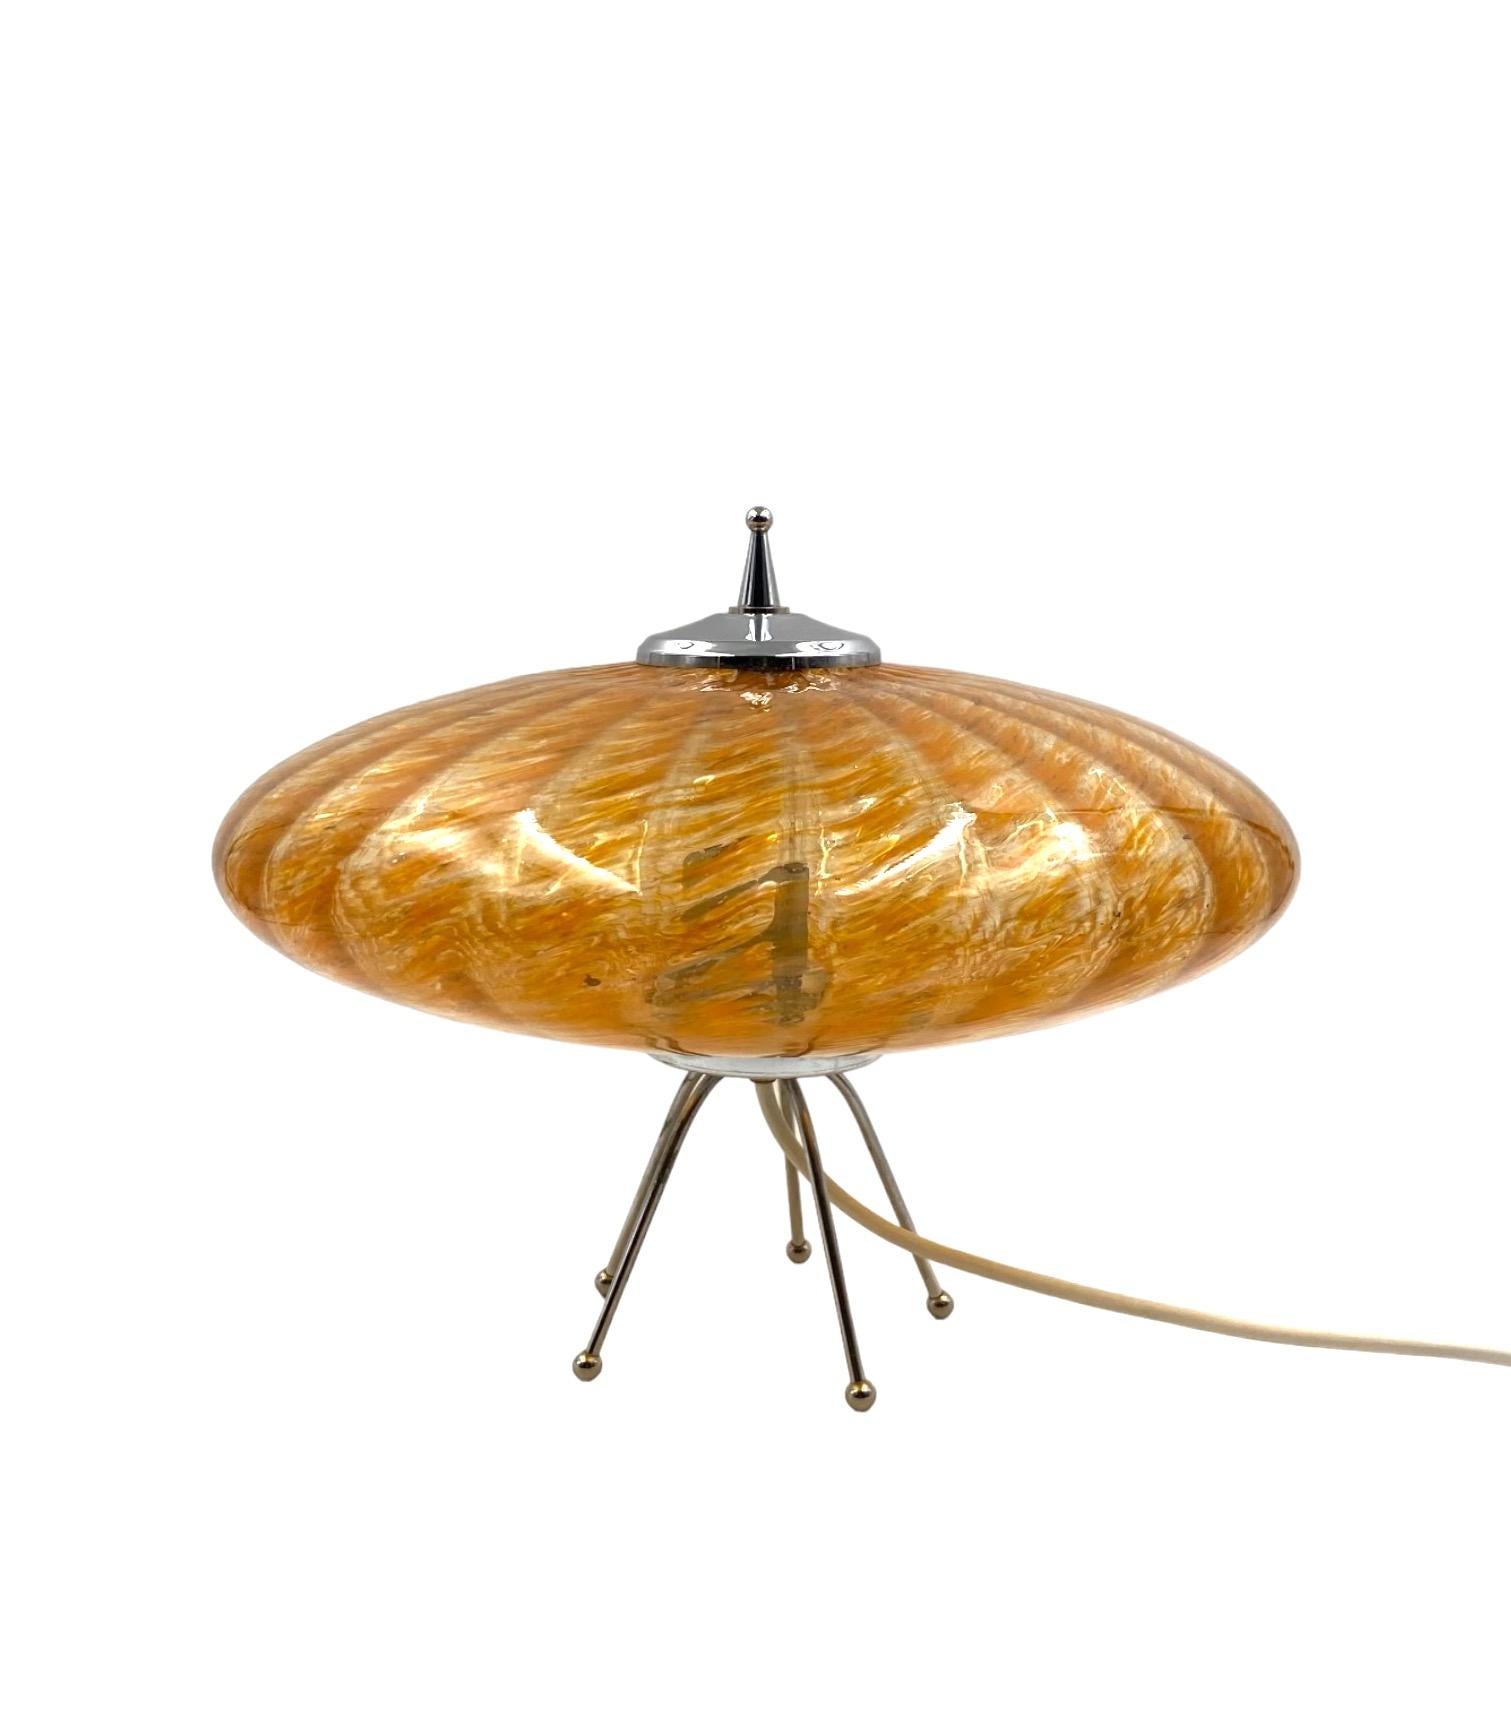 Murano orange glass flying saucer Ufo table lamp, Murano Italy 1970s For Sale 3